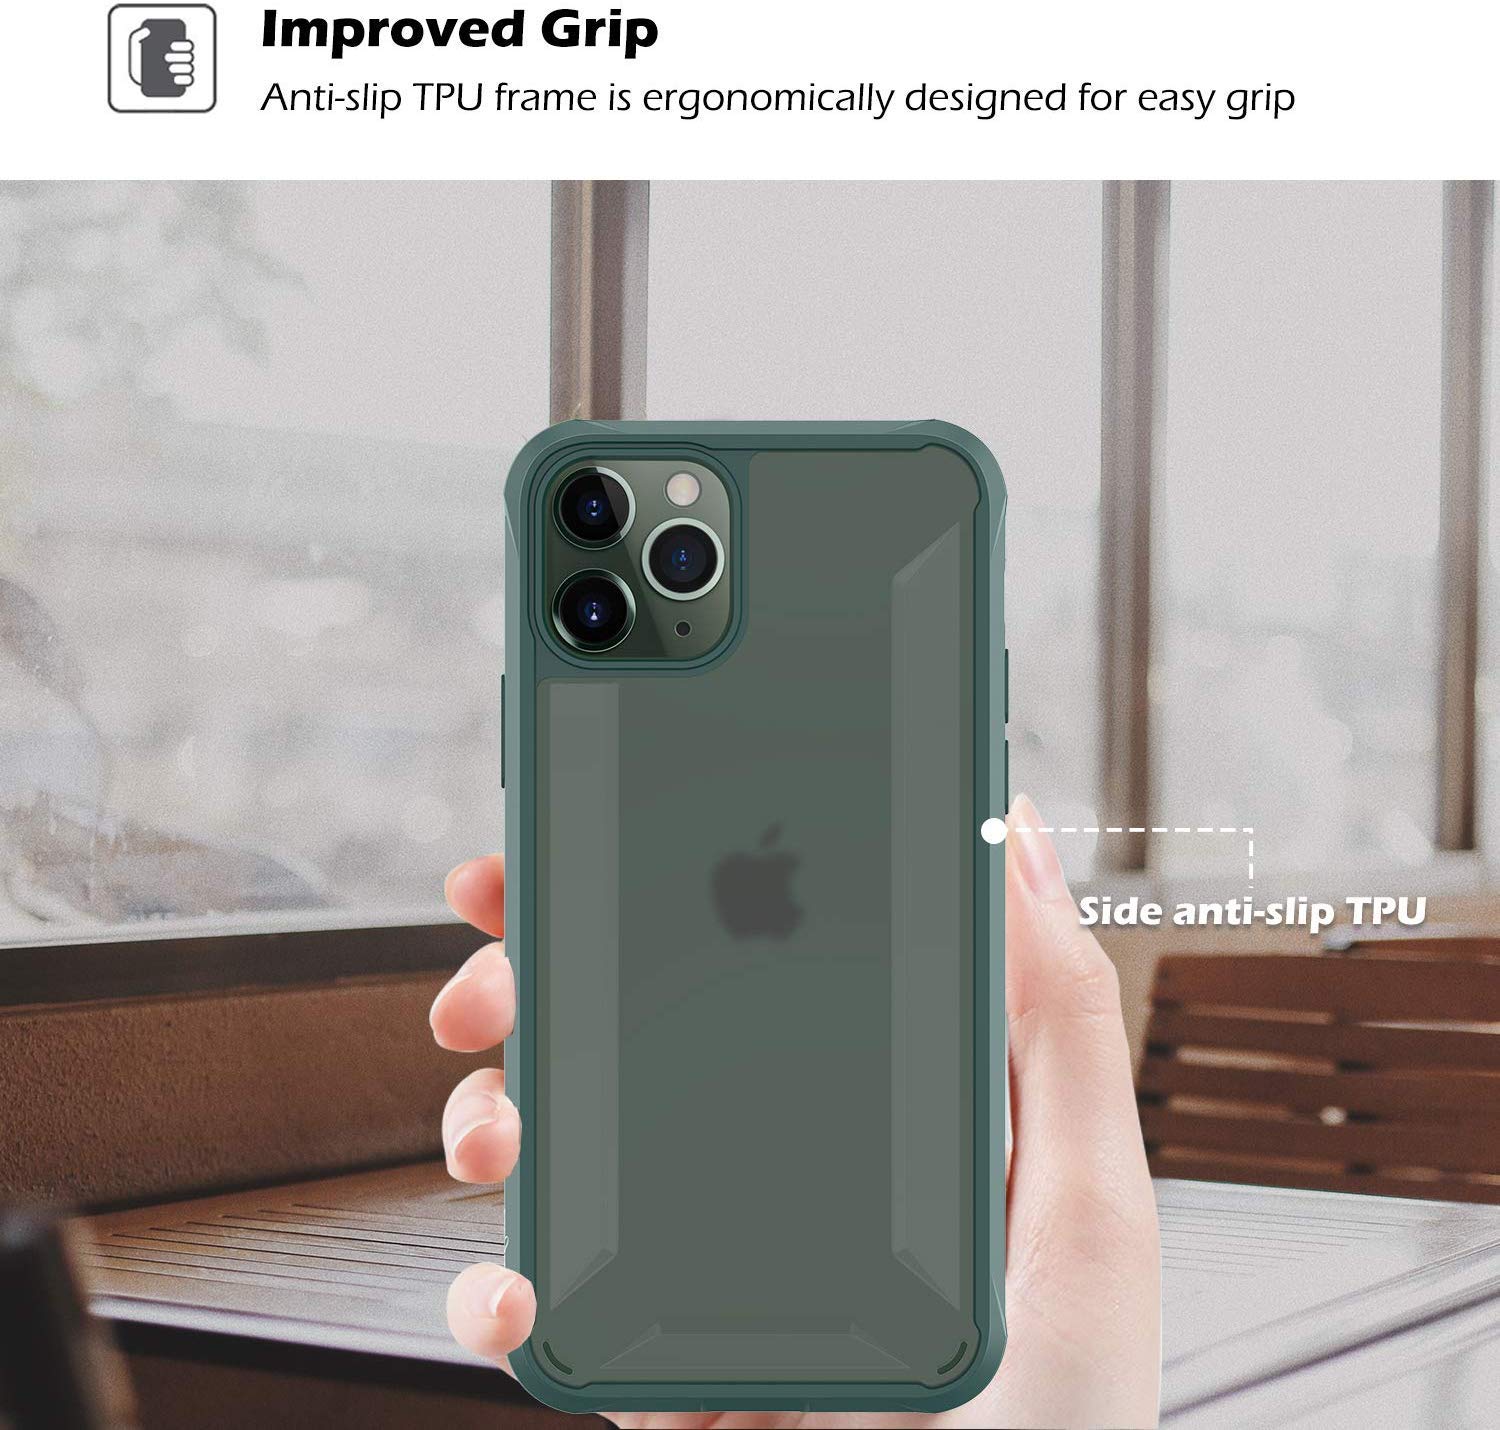 Premium Hybrid Protection Heavy Duty Soft TPU+ Hard PC Clear Case for Apple iPhone 11 Pro